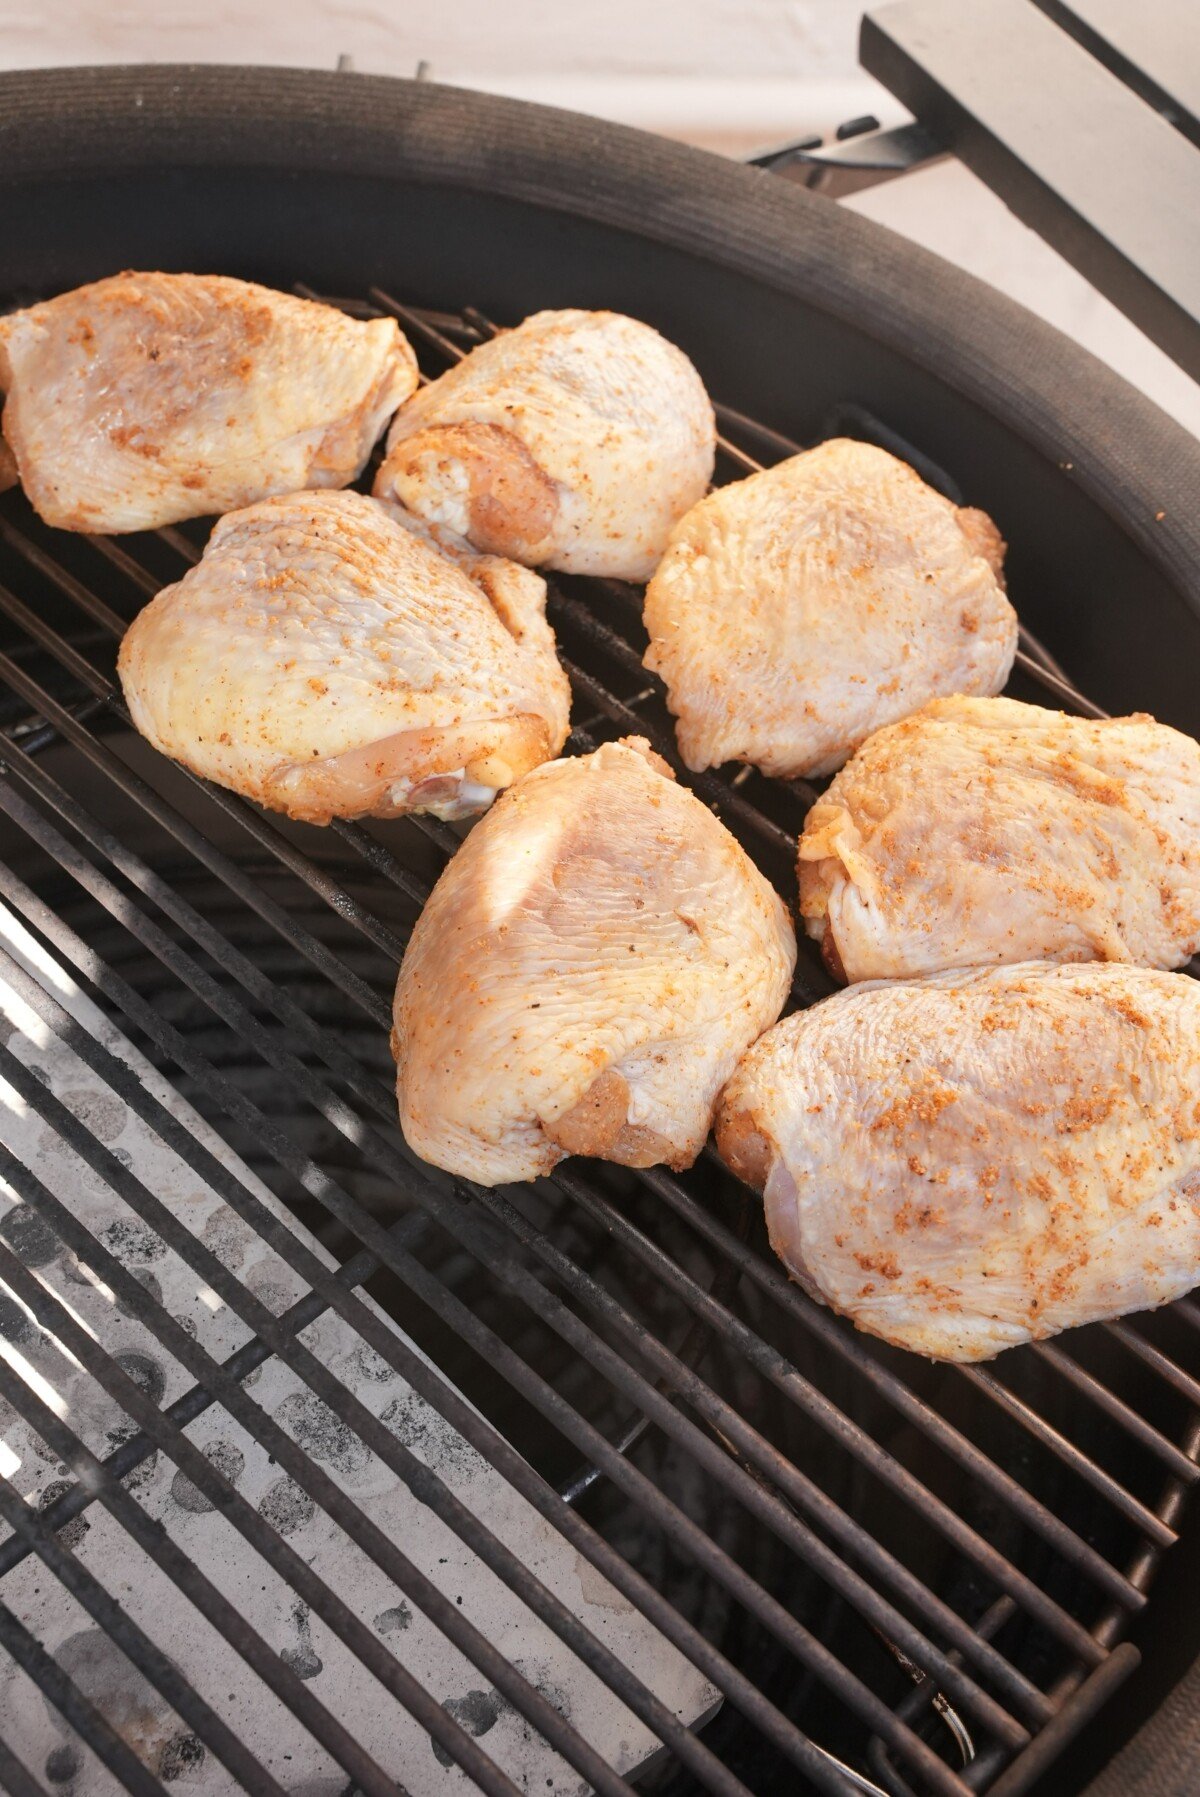 Seasoned chicken thighs on the indirect side of the grill.